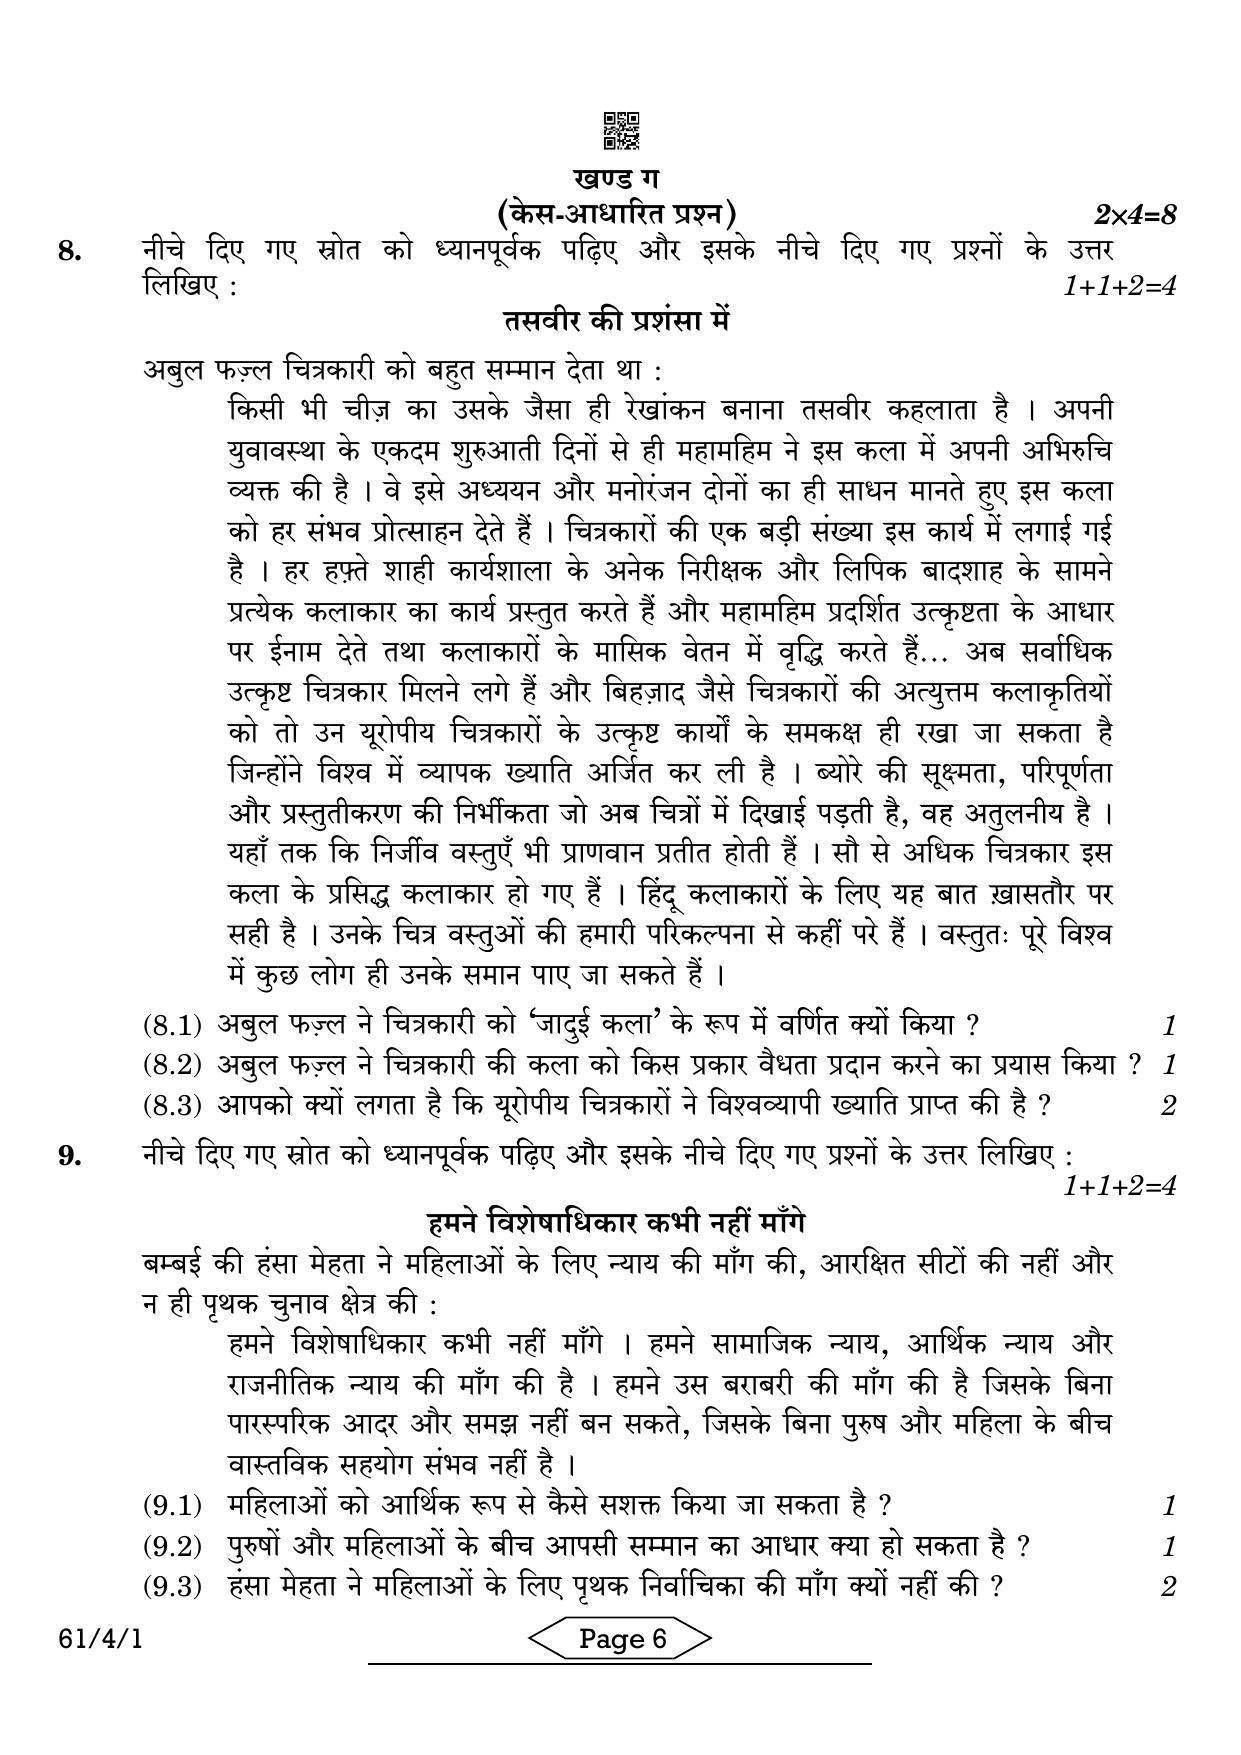 CBSE Class 12 61-4-1 History 2022 Question Paper - Page 6